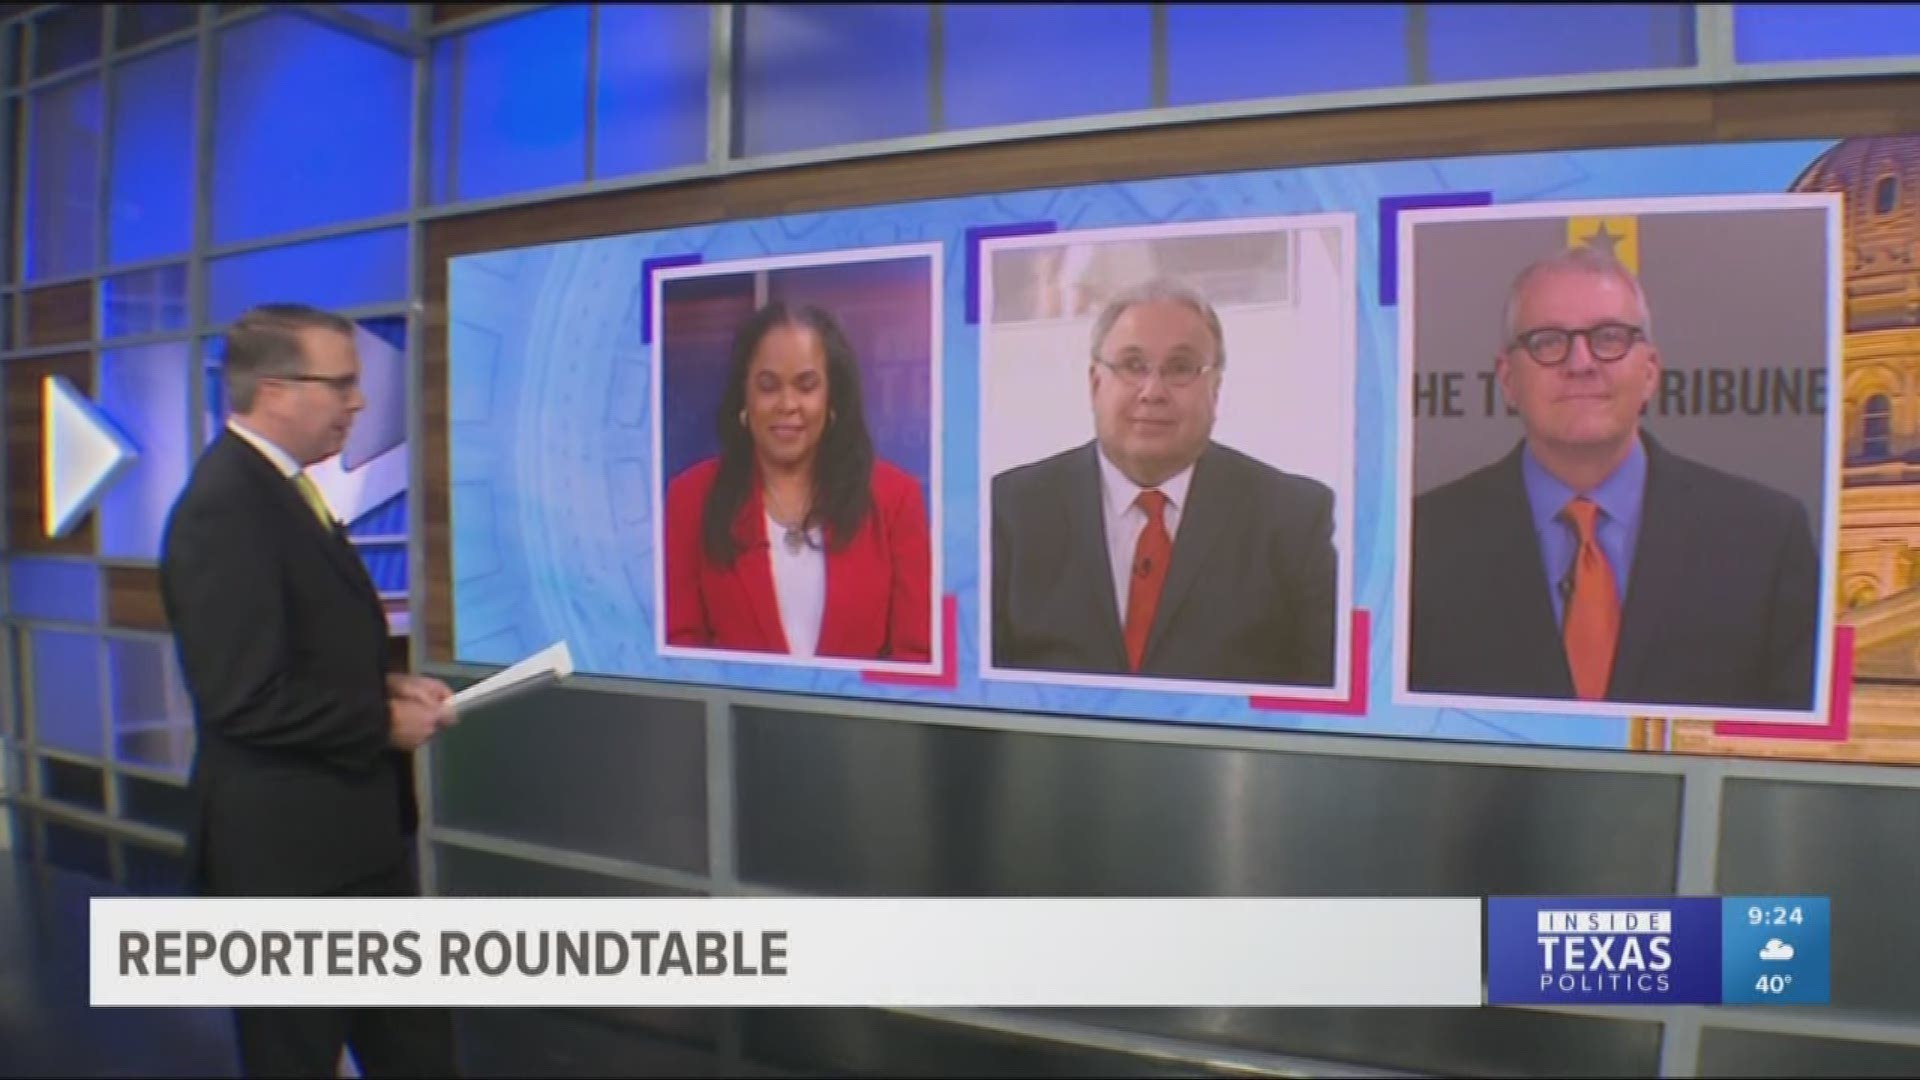 Reporters Roundtable puts the headlines in perspective each week. Ross Ramsey and Bud Kennedy returned along with Berna Dean Steptoe, WFAA's political producer. Ross, Bud, and Berna Dean discussed whether the Dallas Fort Worth area is losing clout in Aust